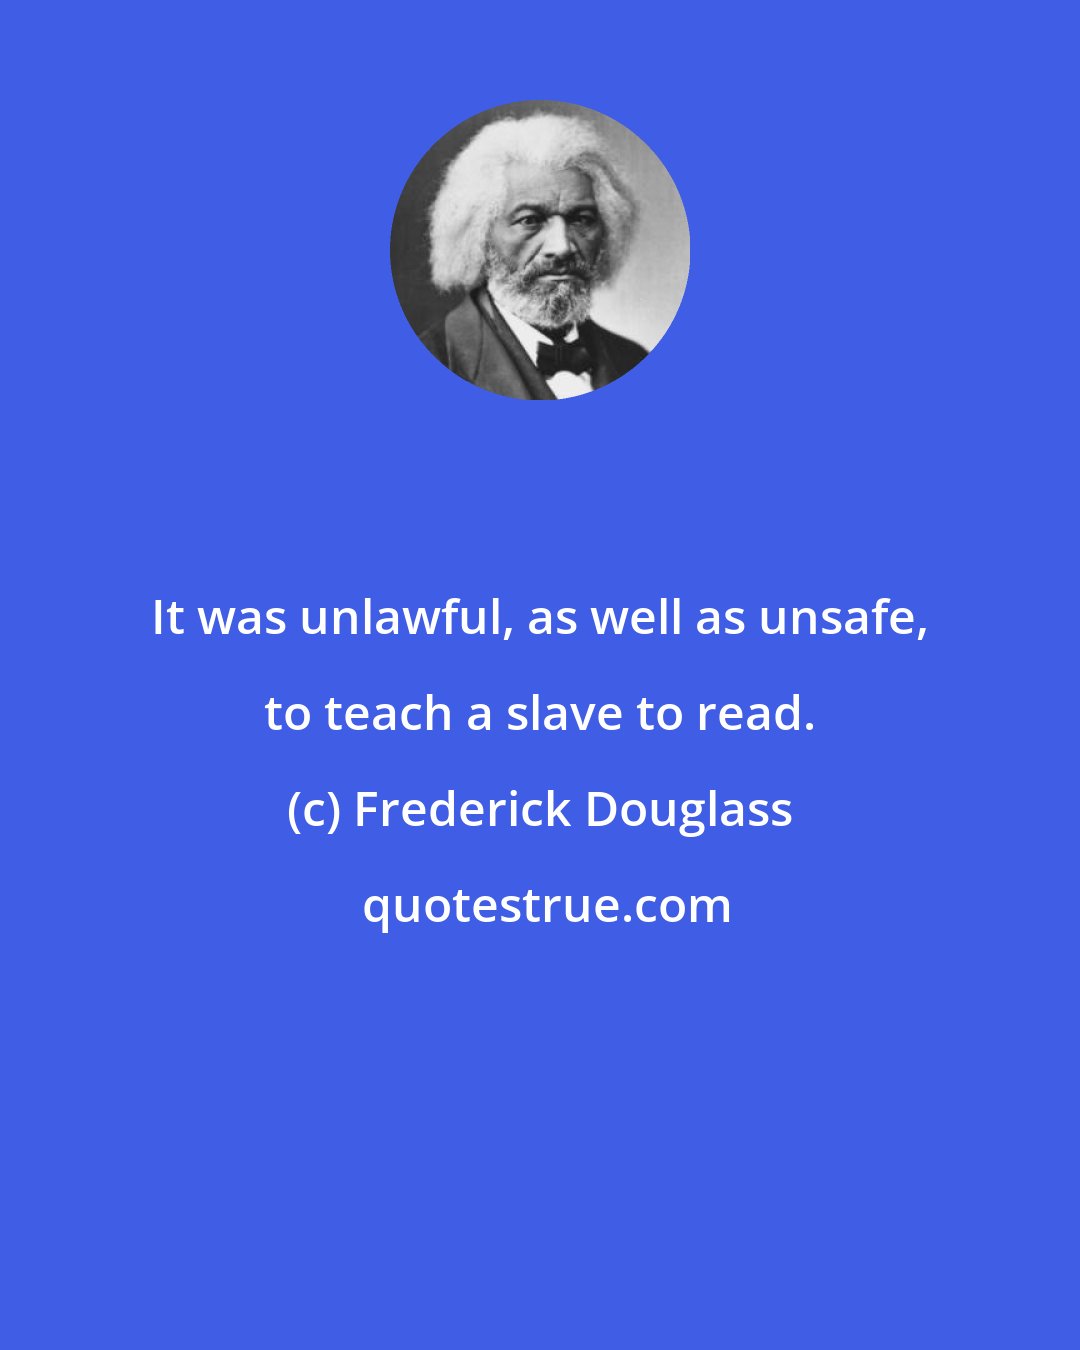 Frederick Douglass: It was unlawful, as well as unsafe, to teach a slave to read.